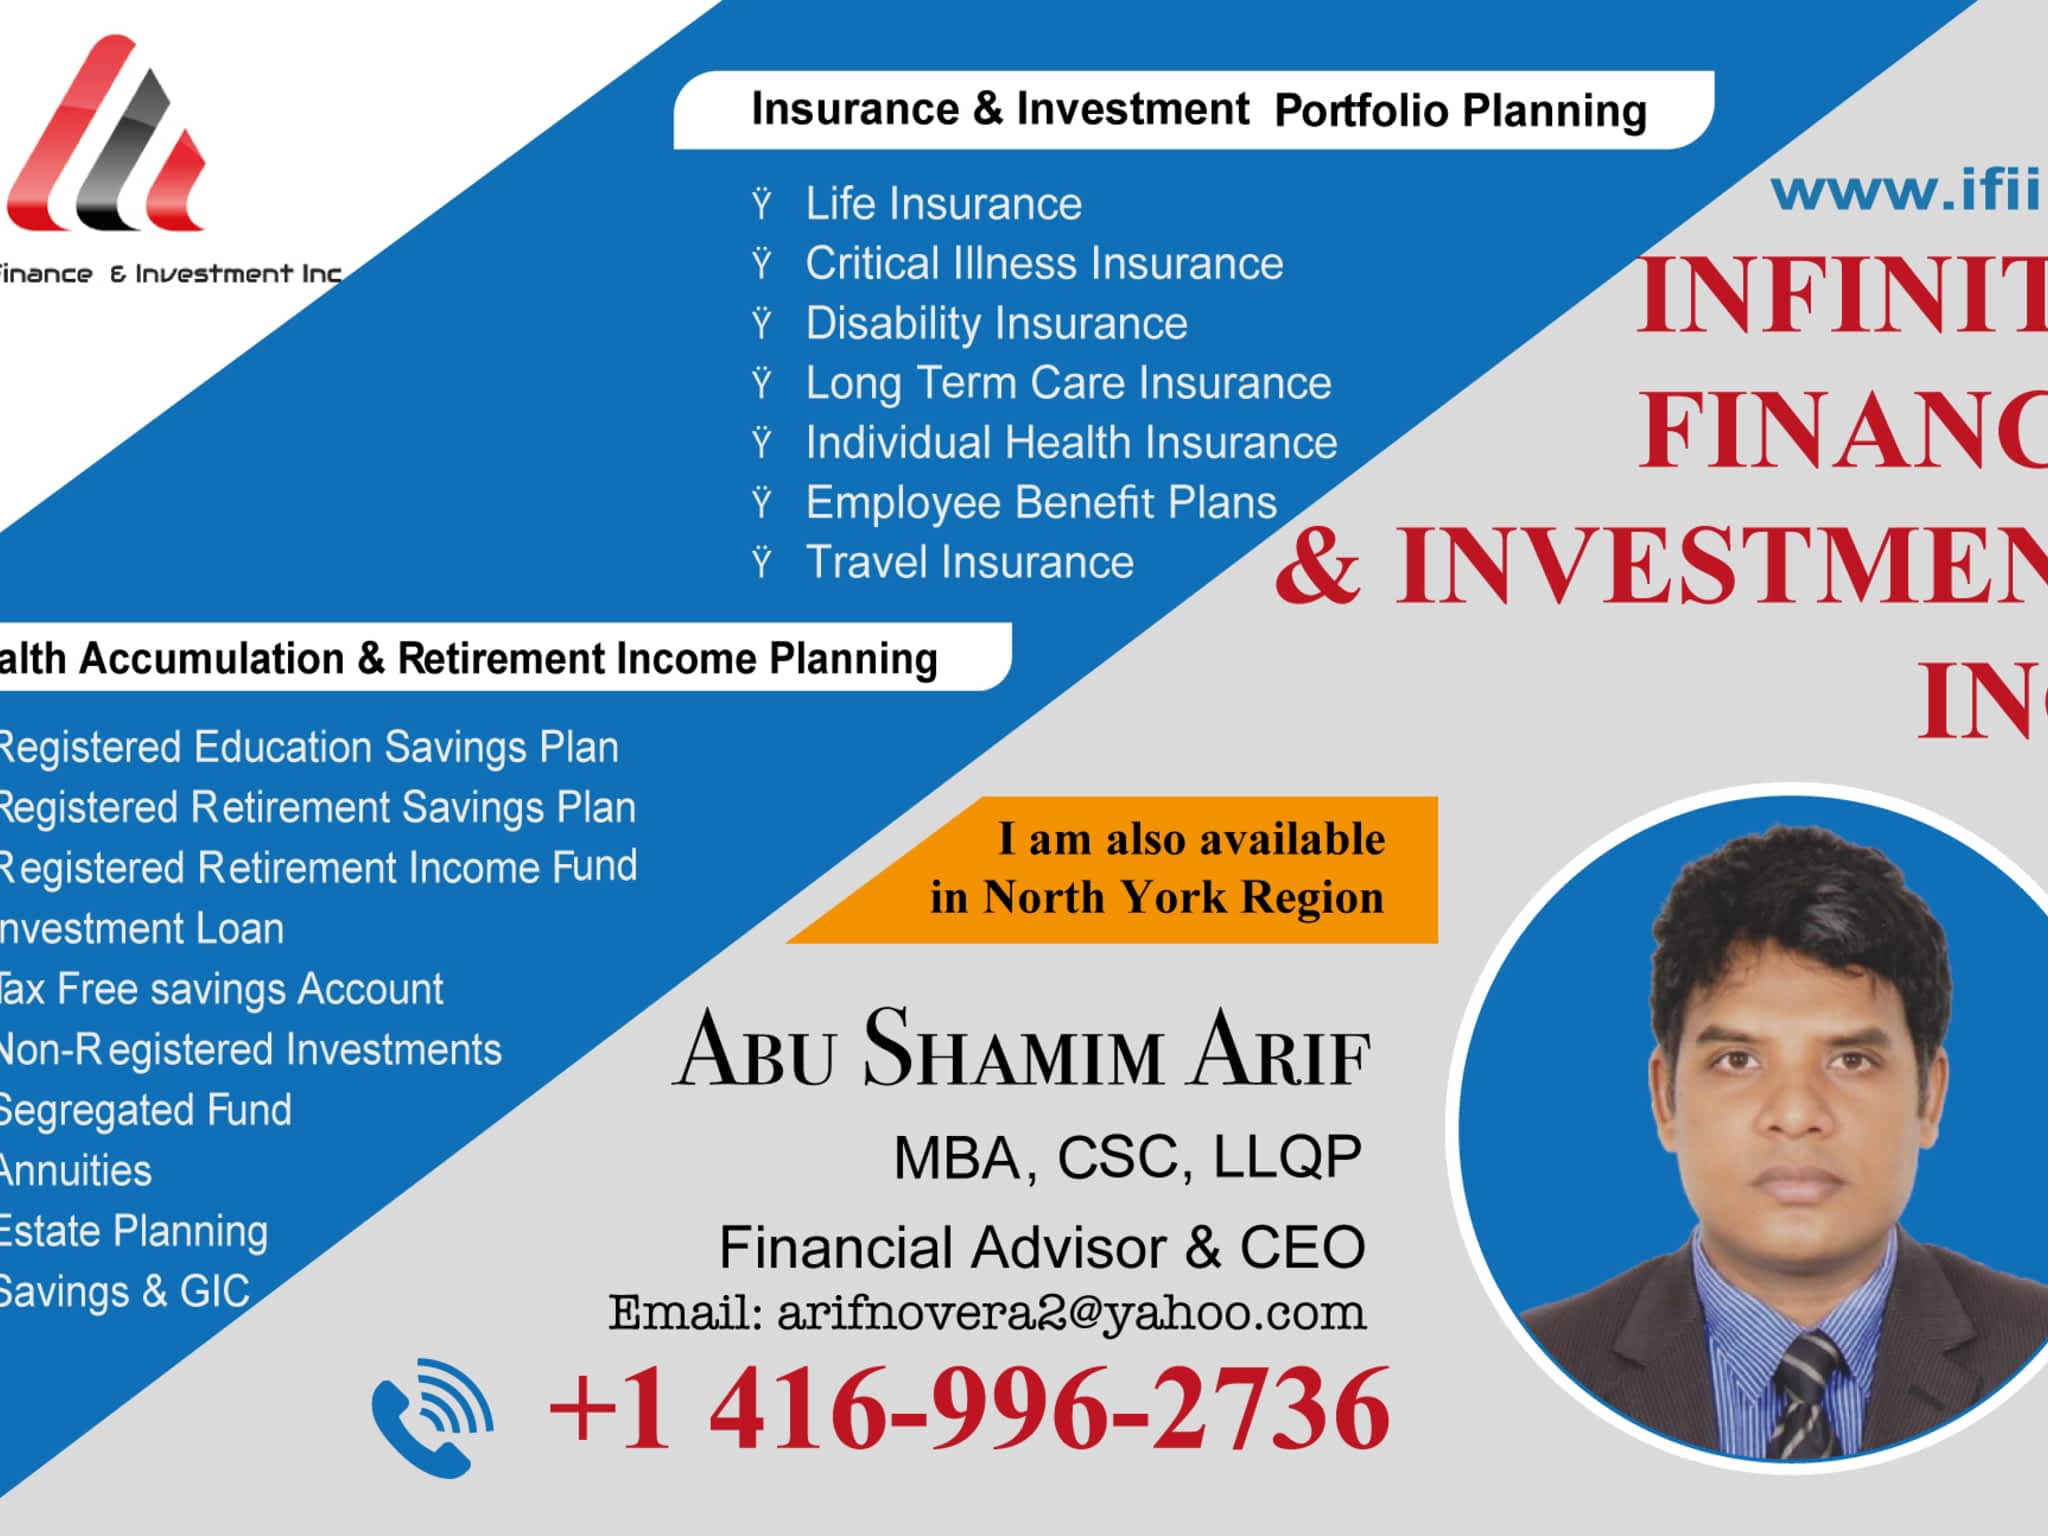 photo Infinity Finance And Investment Inc